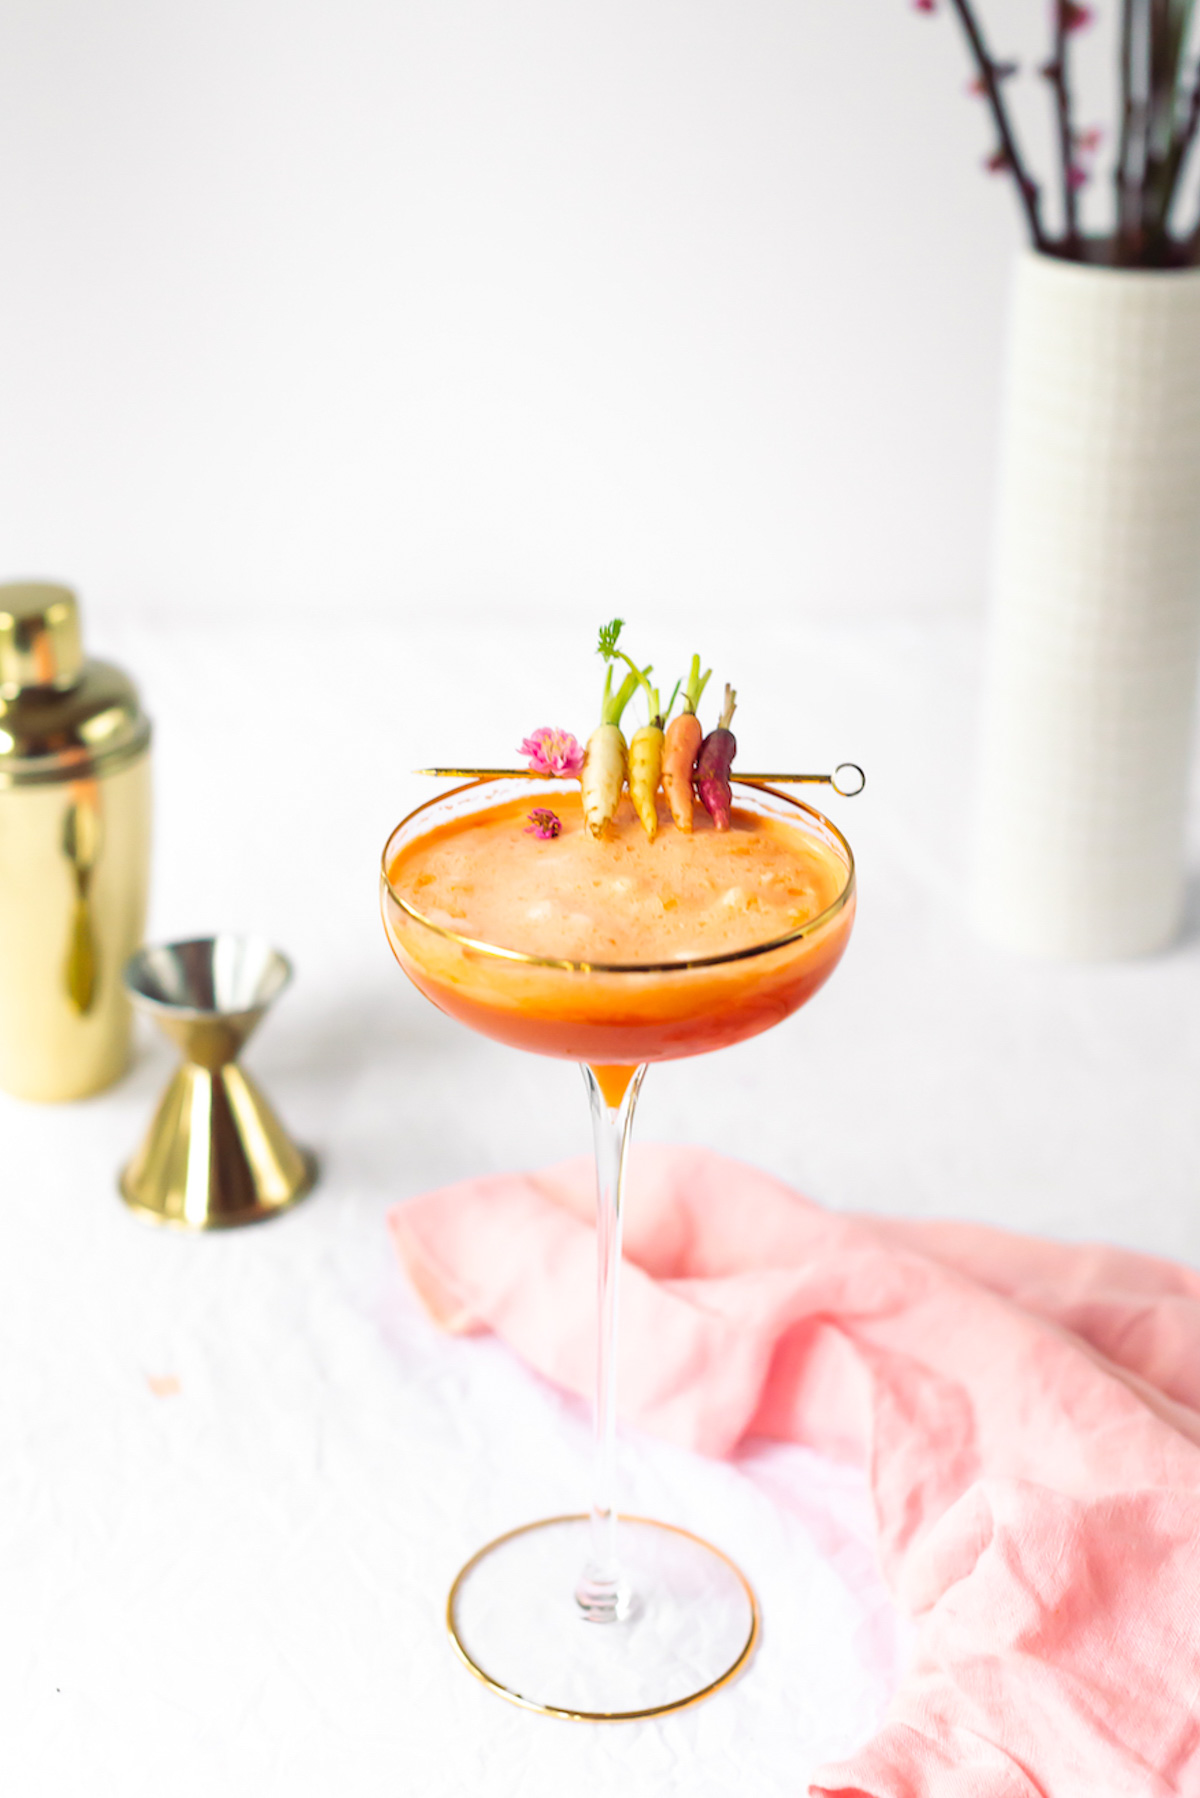 Carrot-cocktail-recipe-from-Sugar-Cloth